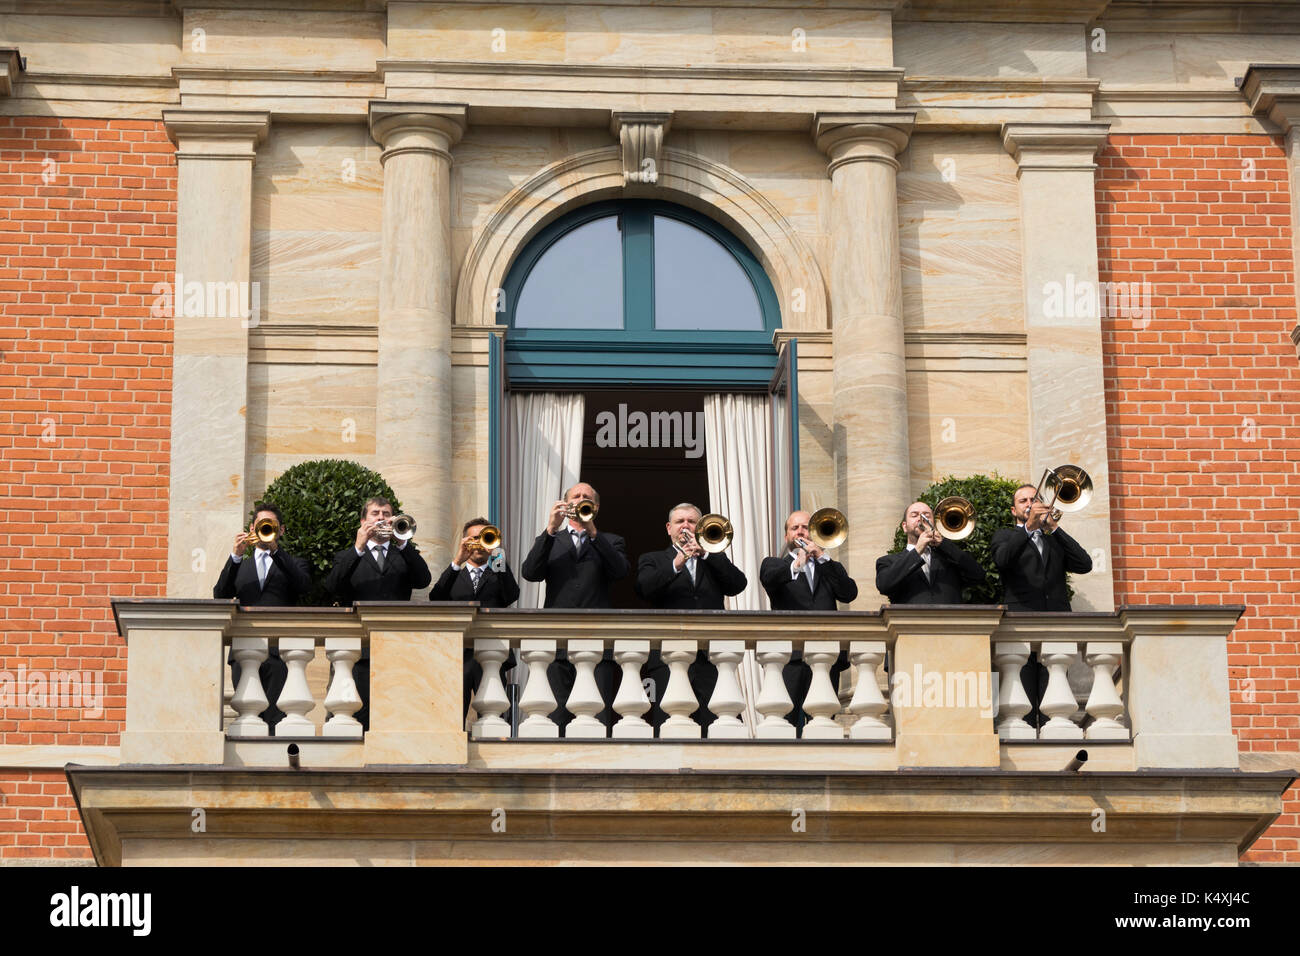 pre-performance fanfare, The Bayreuth Festspielhaus or Bayreuth Festival Theatre opera house, Franconia, Bavaria, Germany Stock Photo